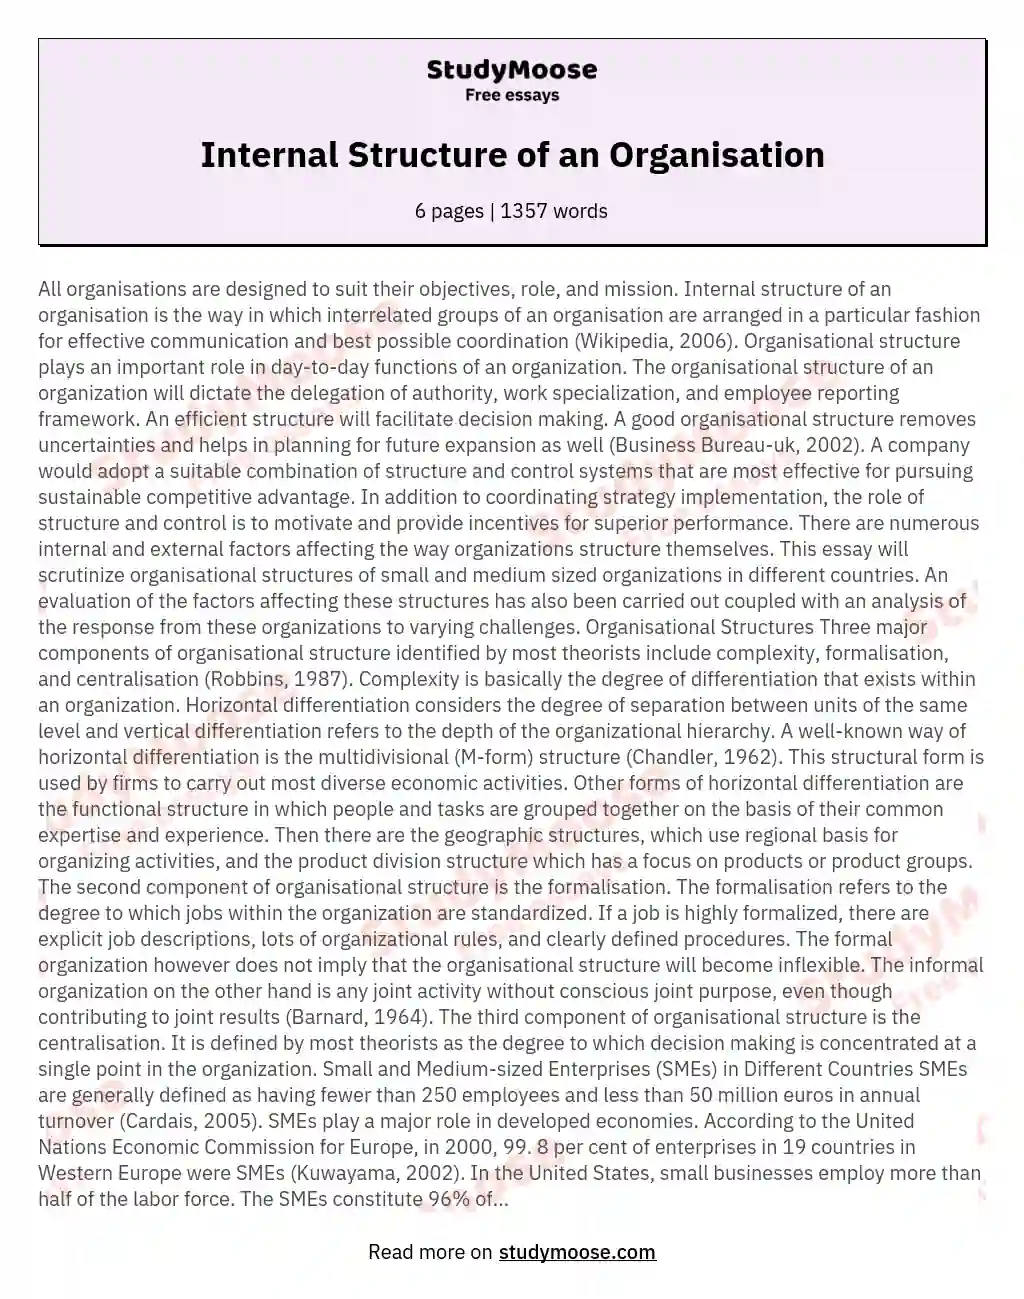 essay about organizational structure